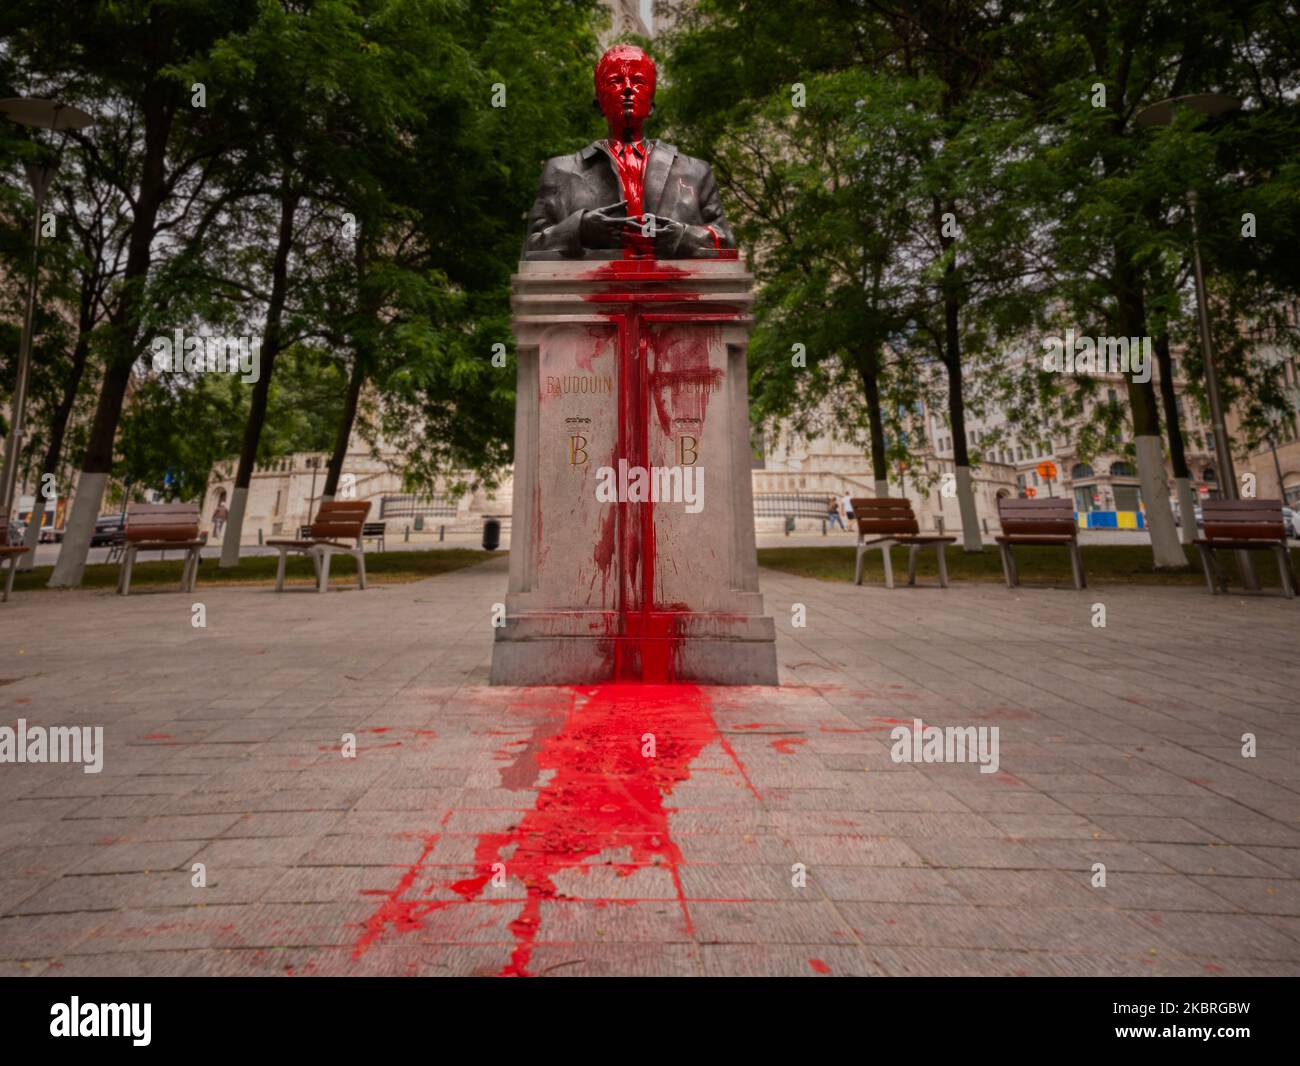 Vandalized statue of King of Belgium Boudewijn in Brussels - Belgium on 22 June 2020. He was the last Belgian king to be sovereign of the Congo, in 1960, King Boudewijn declared the Belgian colony of Congo independent. Protest and demonstrations against racism have been raging worldwide since the death of American George Floyd. Due to the increasing awareness of colonialism in Belgium municipalities and mayors will decide what to do with King Leopold II statues and names related to colonial Congo. (Photo by Jonathan Raa/NurPhoto) Stock Photo